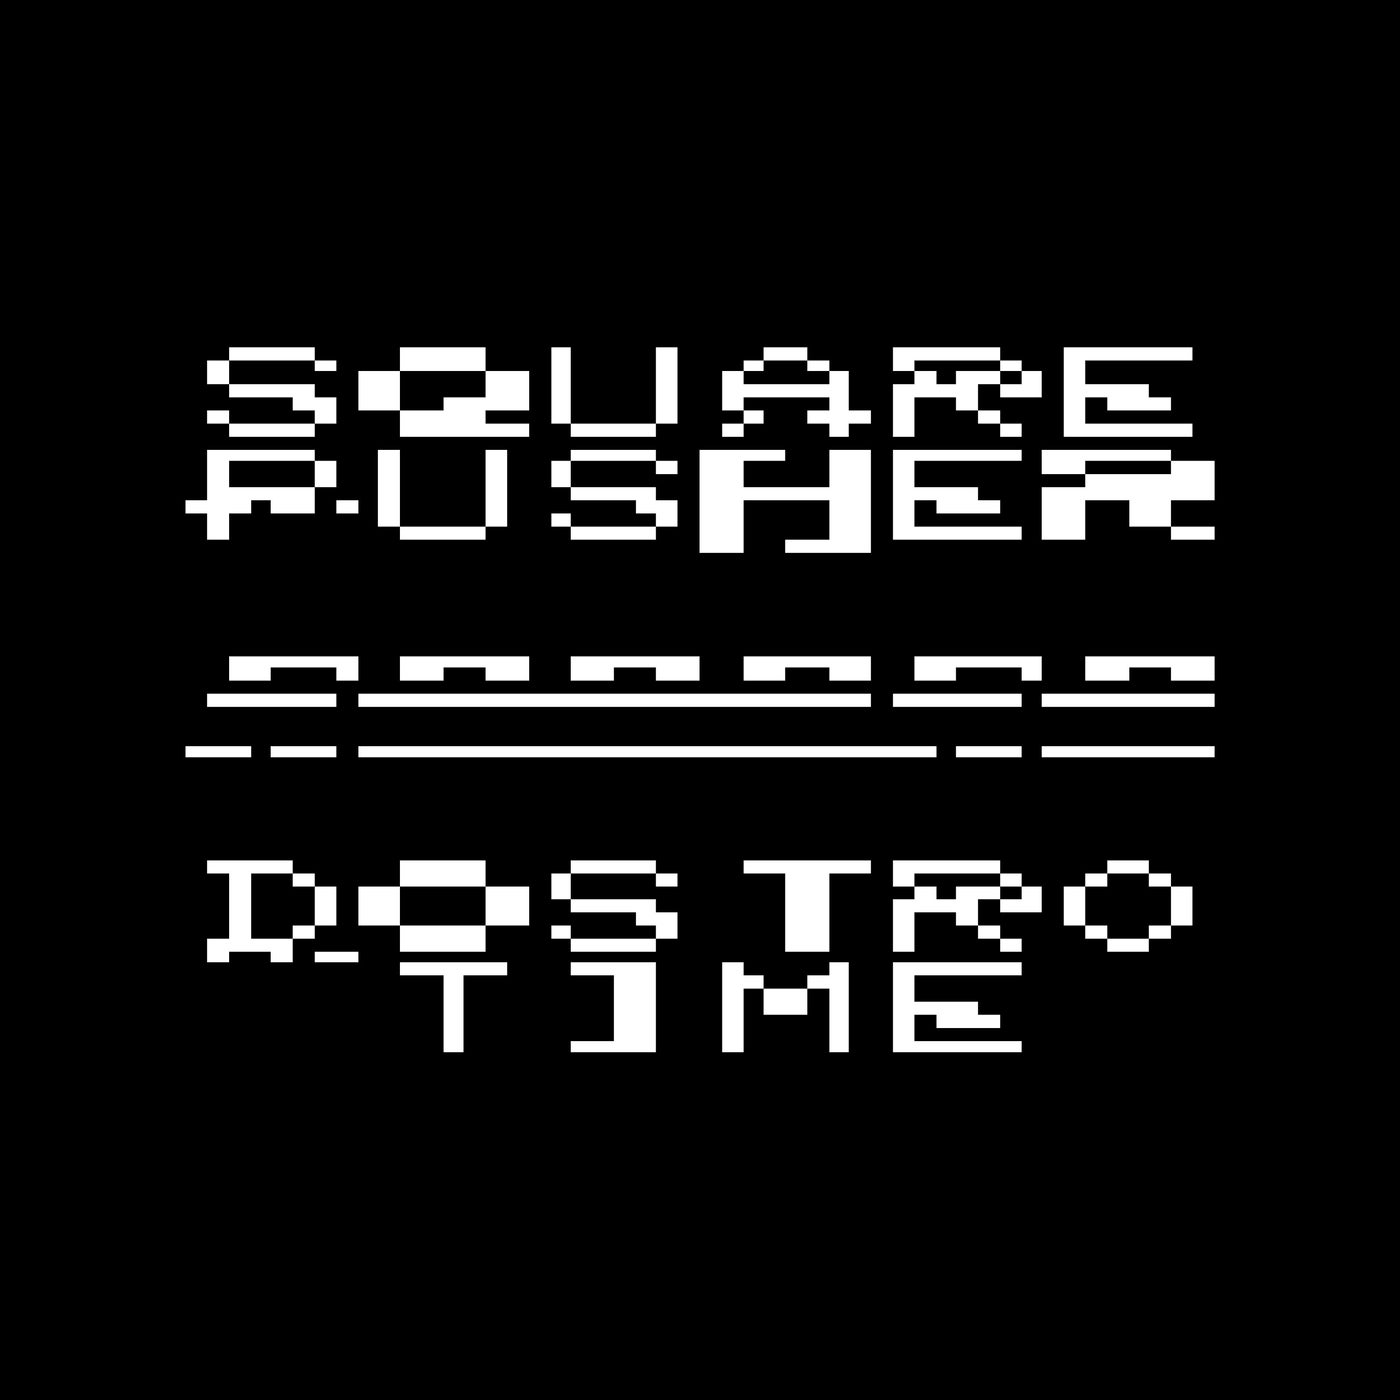 image cover: Squarepusher - Dostrotime on Warp Records